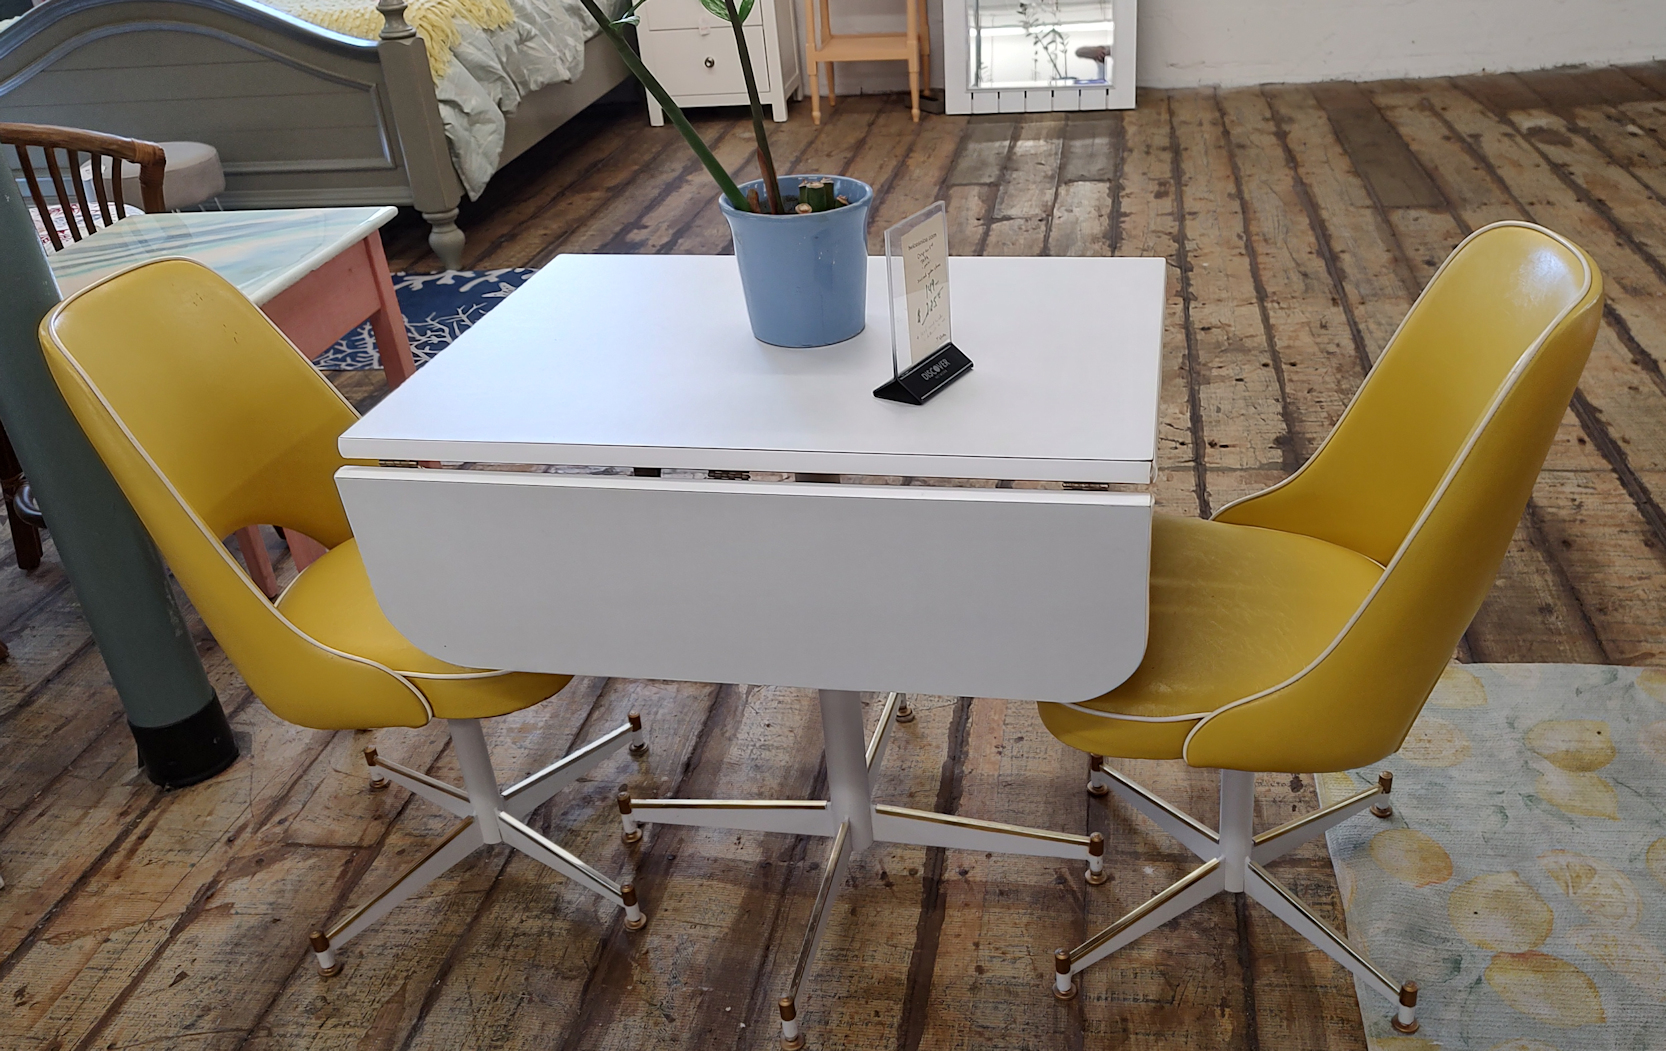 KT0108-Drop-leaf-table-2yellow-chairs